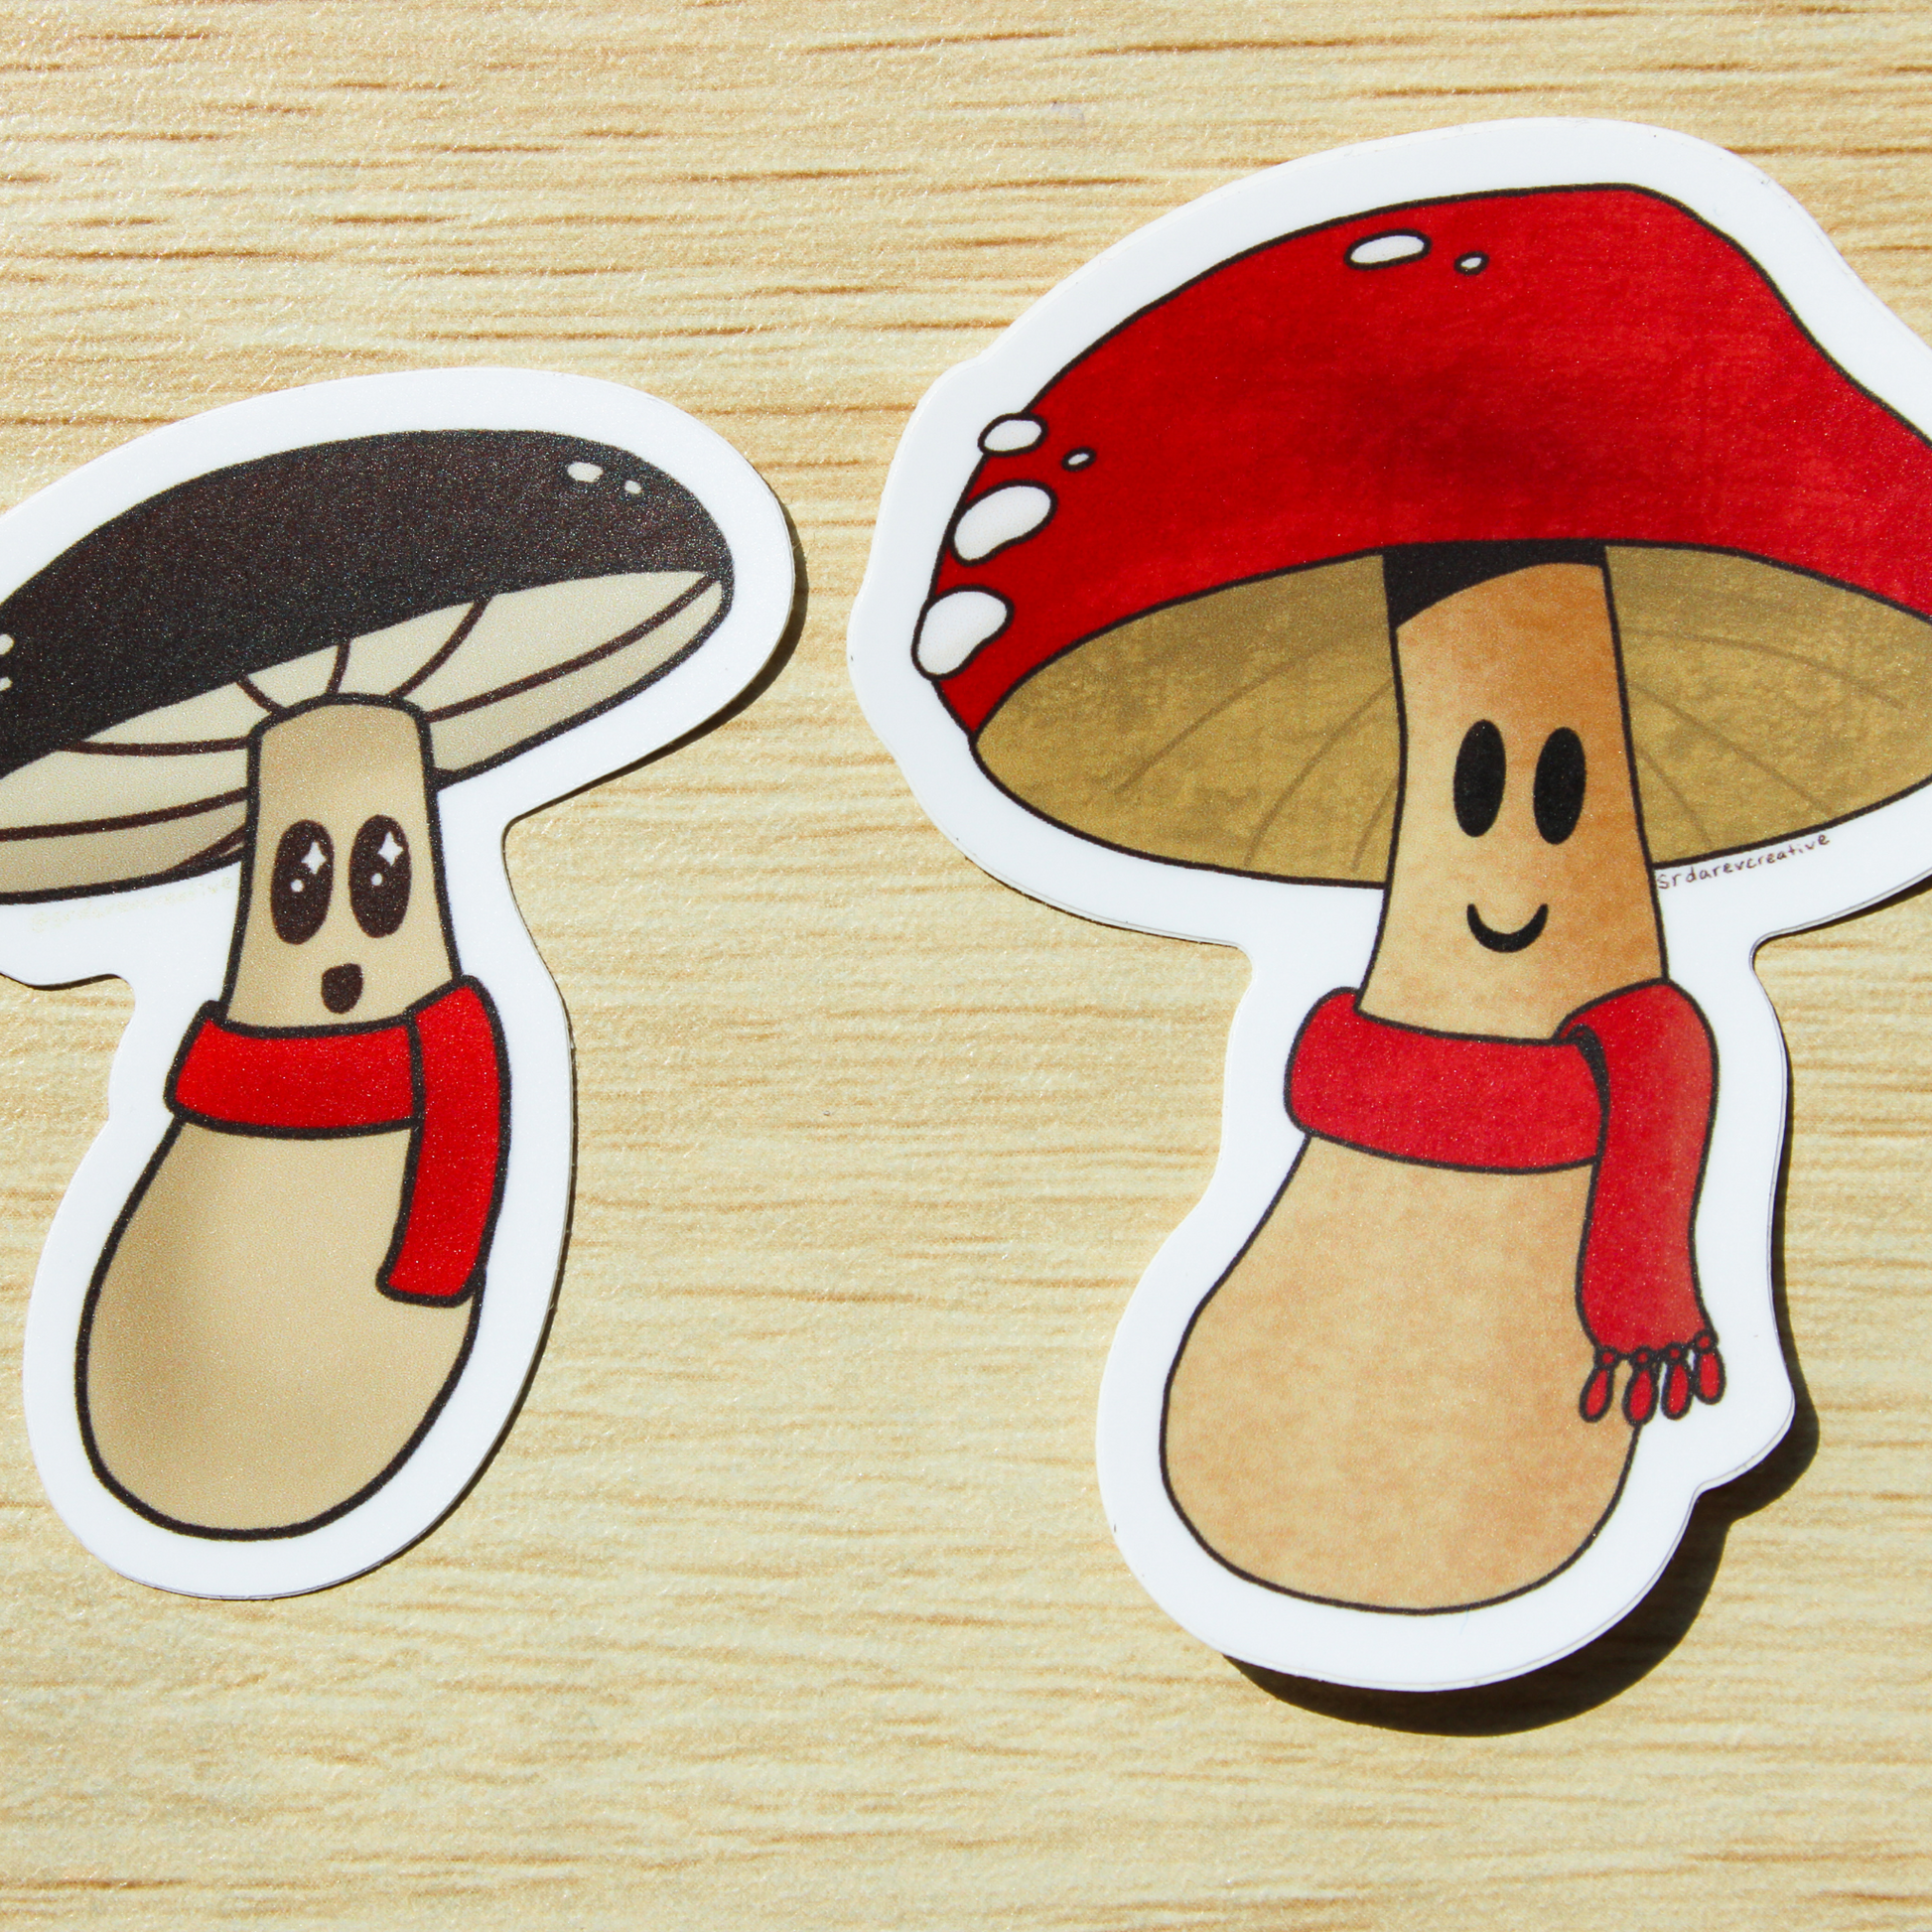 A brown wooden background. On top are two smiling mushroom stickers. On the left is a brown mushroom with a red scarf and on the right is a red mushroom with a red scarf.